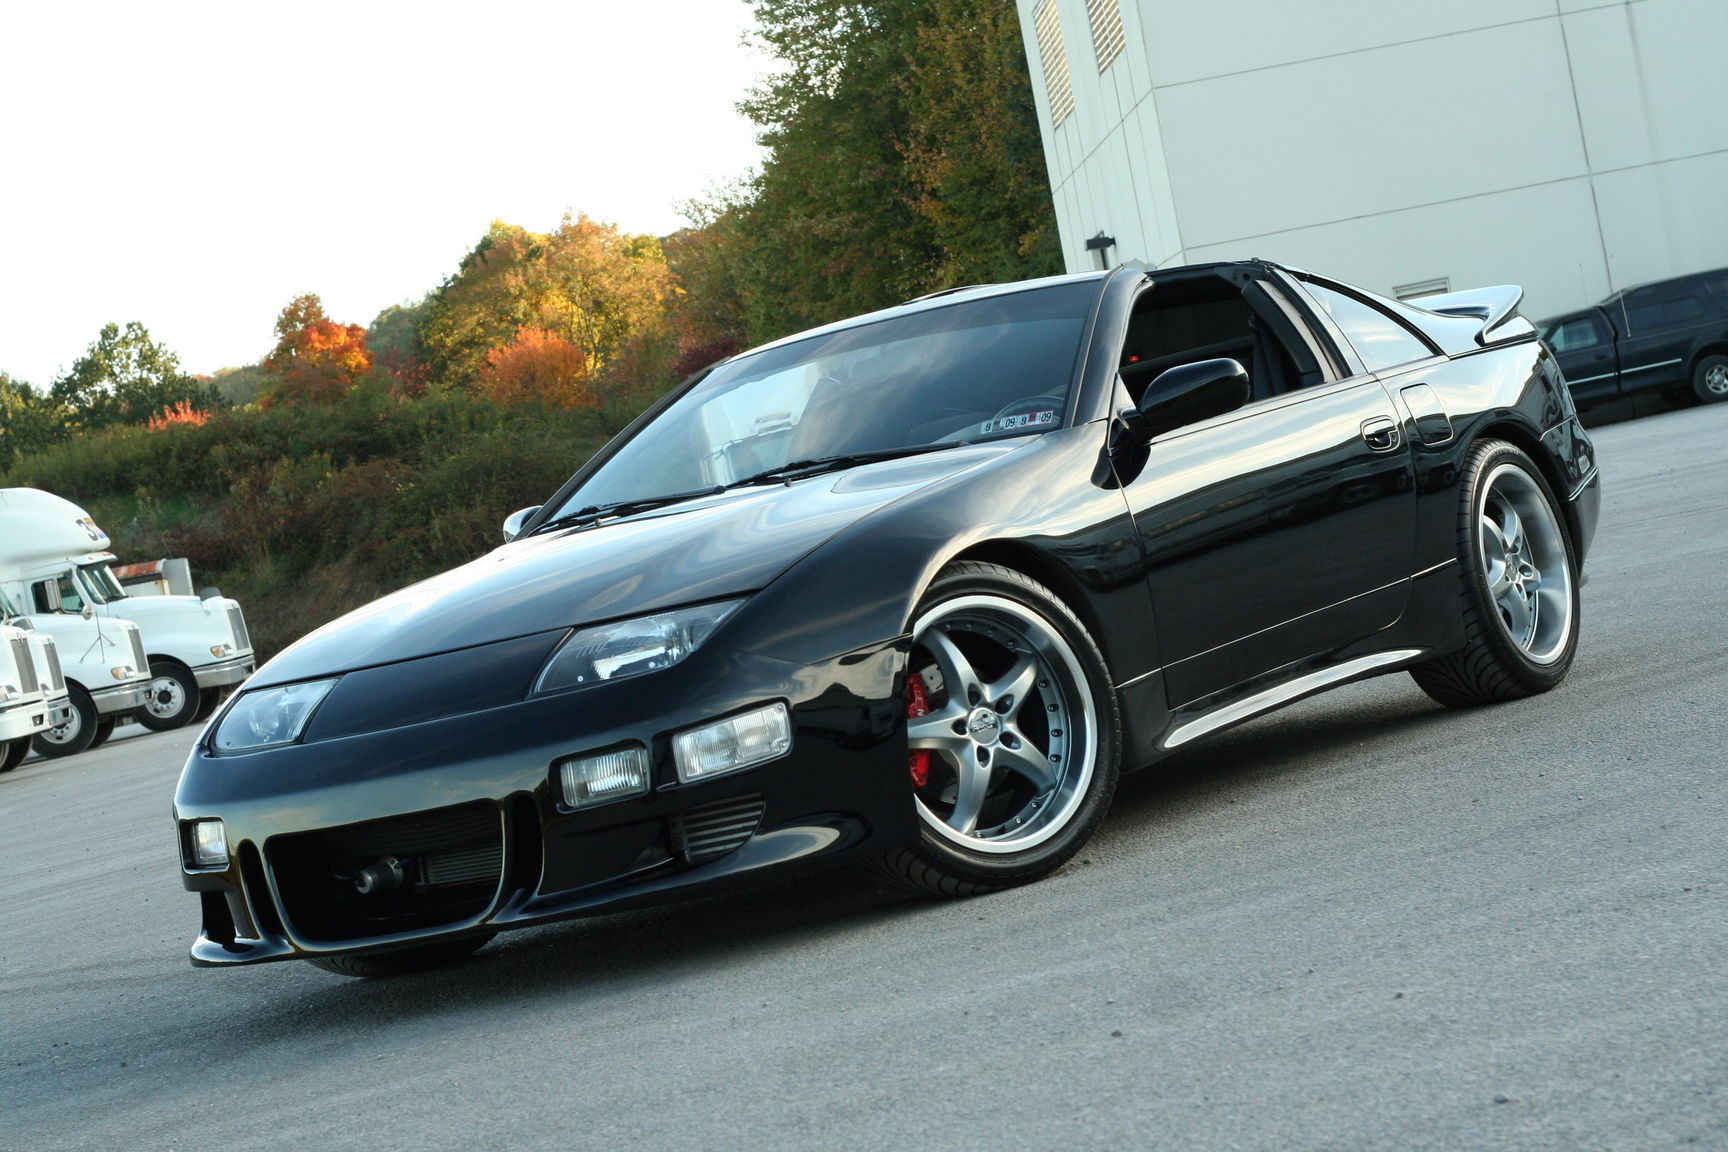 How fast is a nissan 300zx twin turbo #8